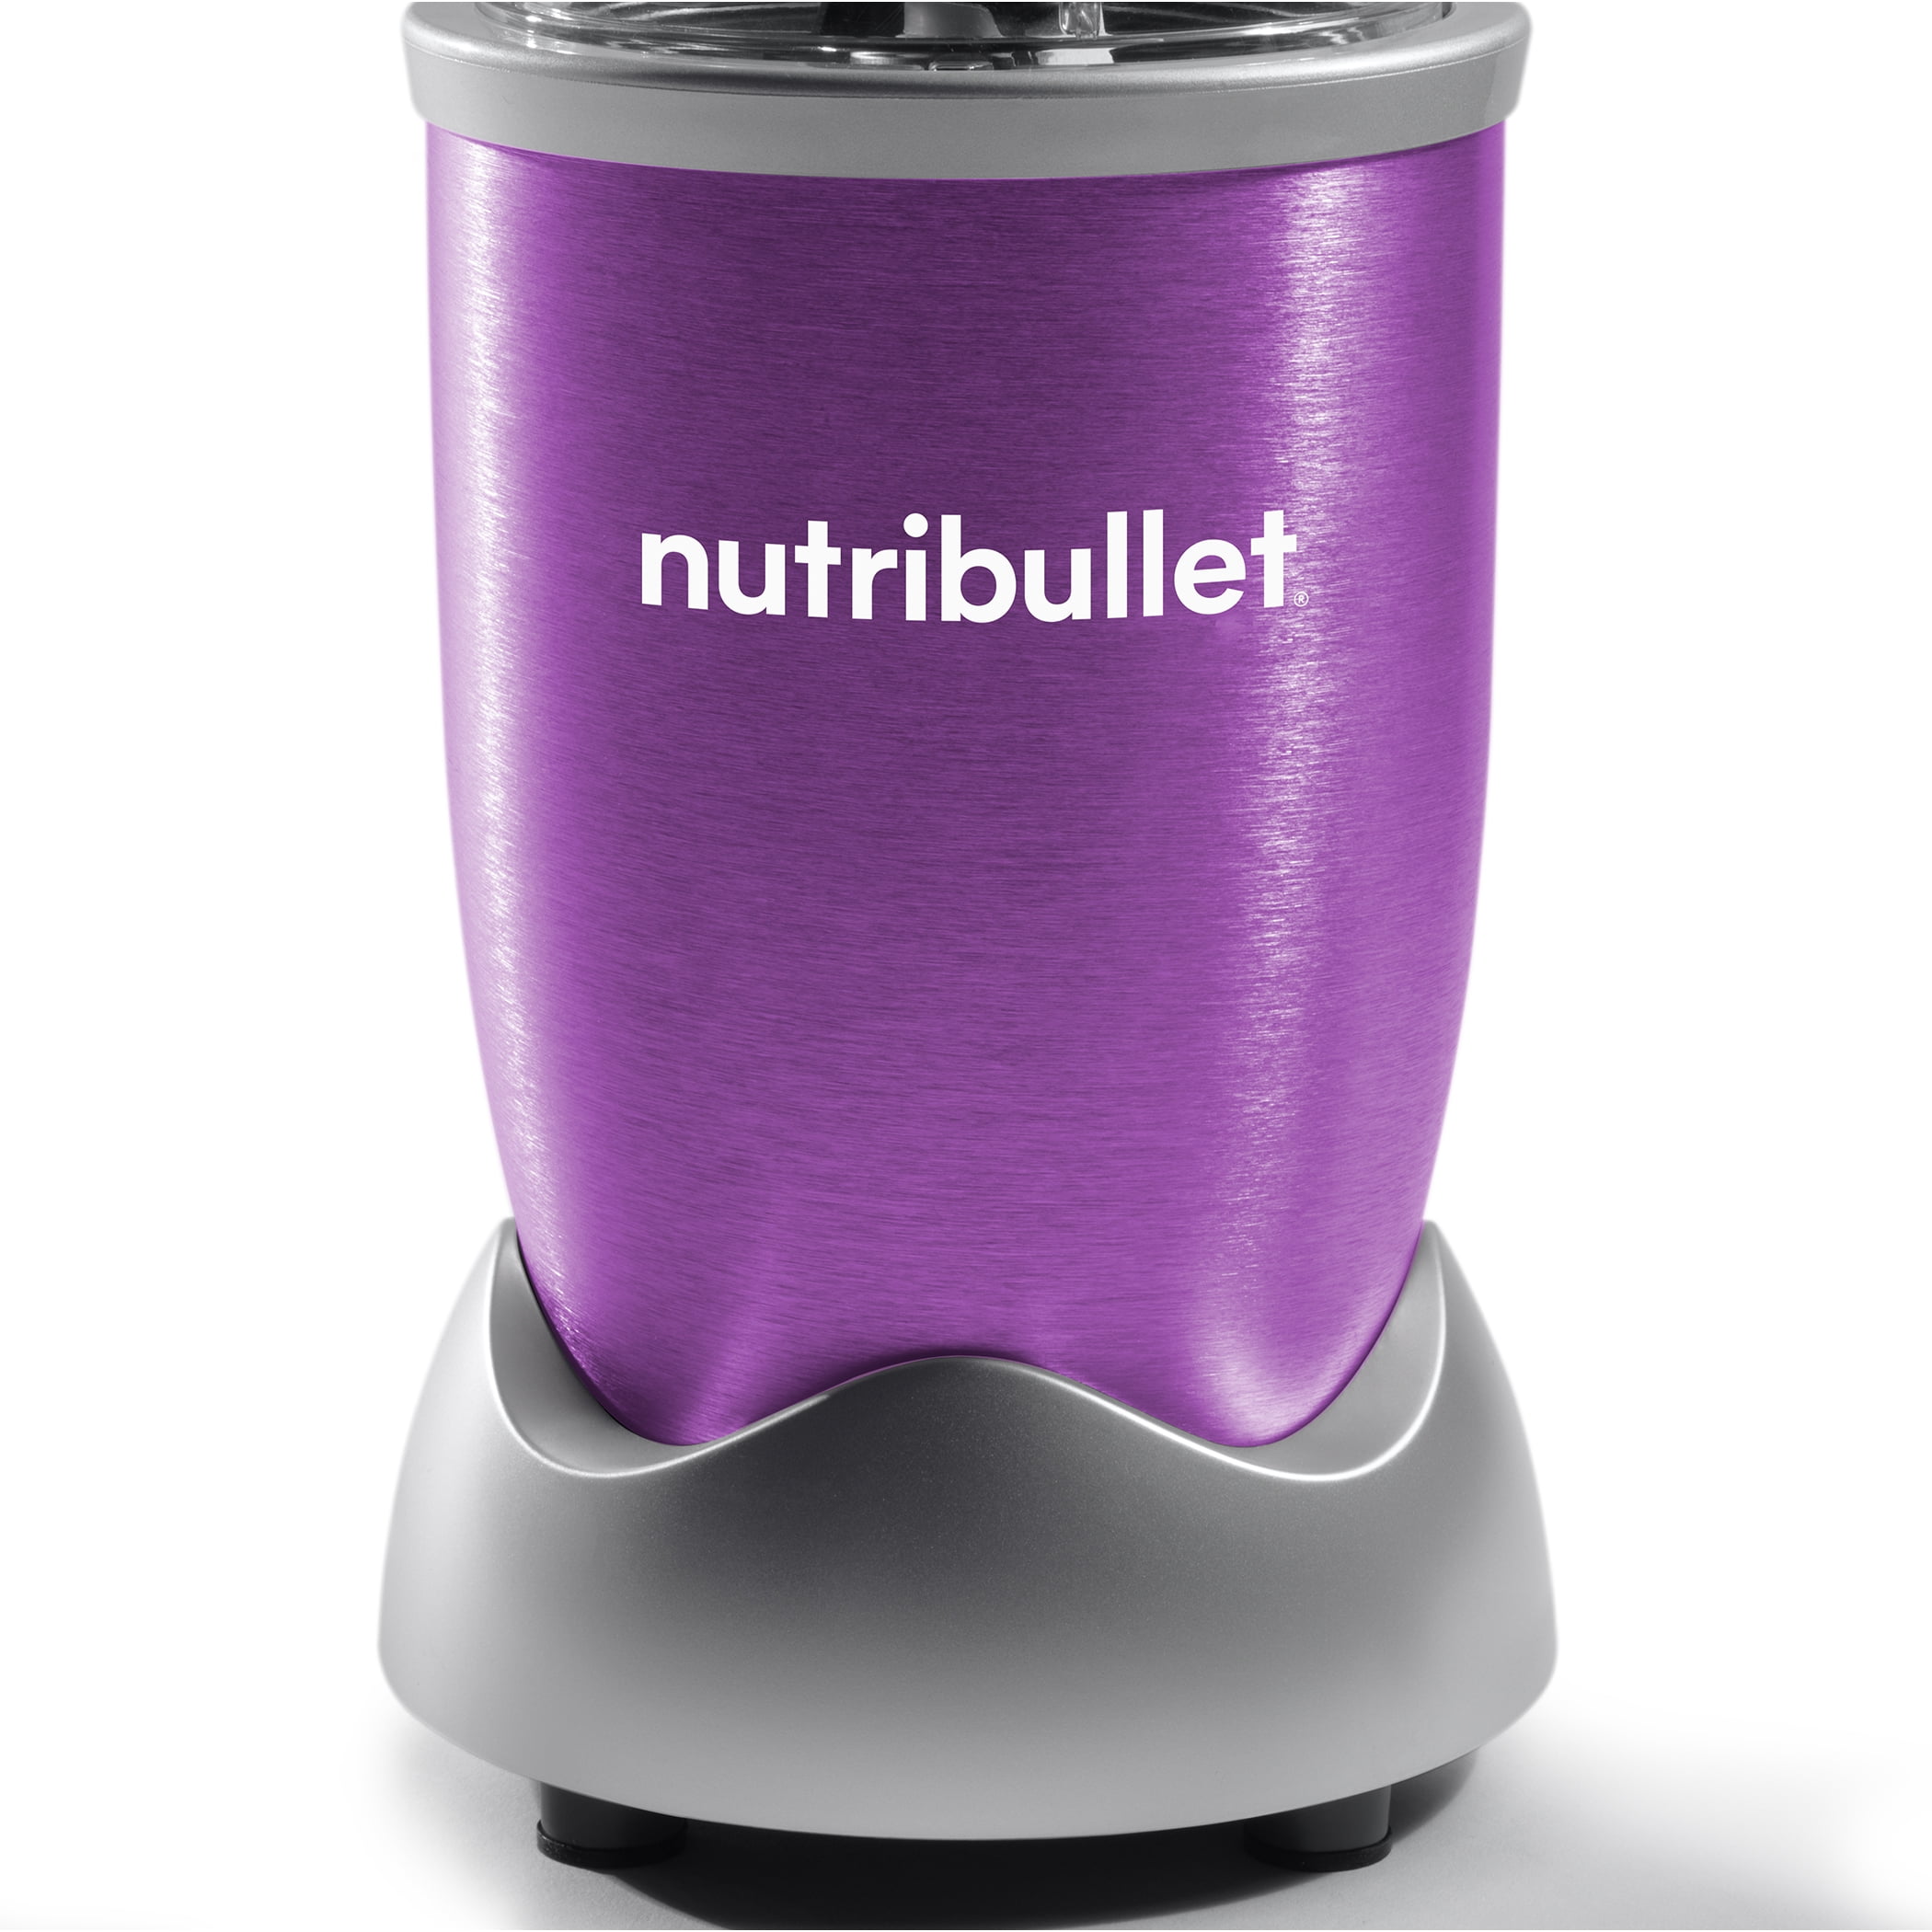 NutriBullet Pro 32 oz. Single Speed Purple Blender with 24 oz. Cup and Lids  NB9-0901PUR - The Home Depot